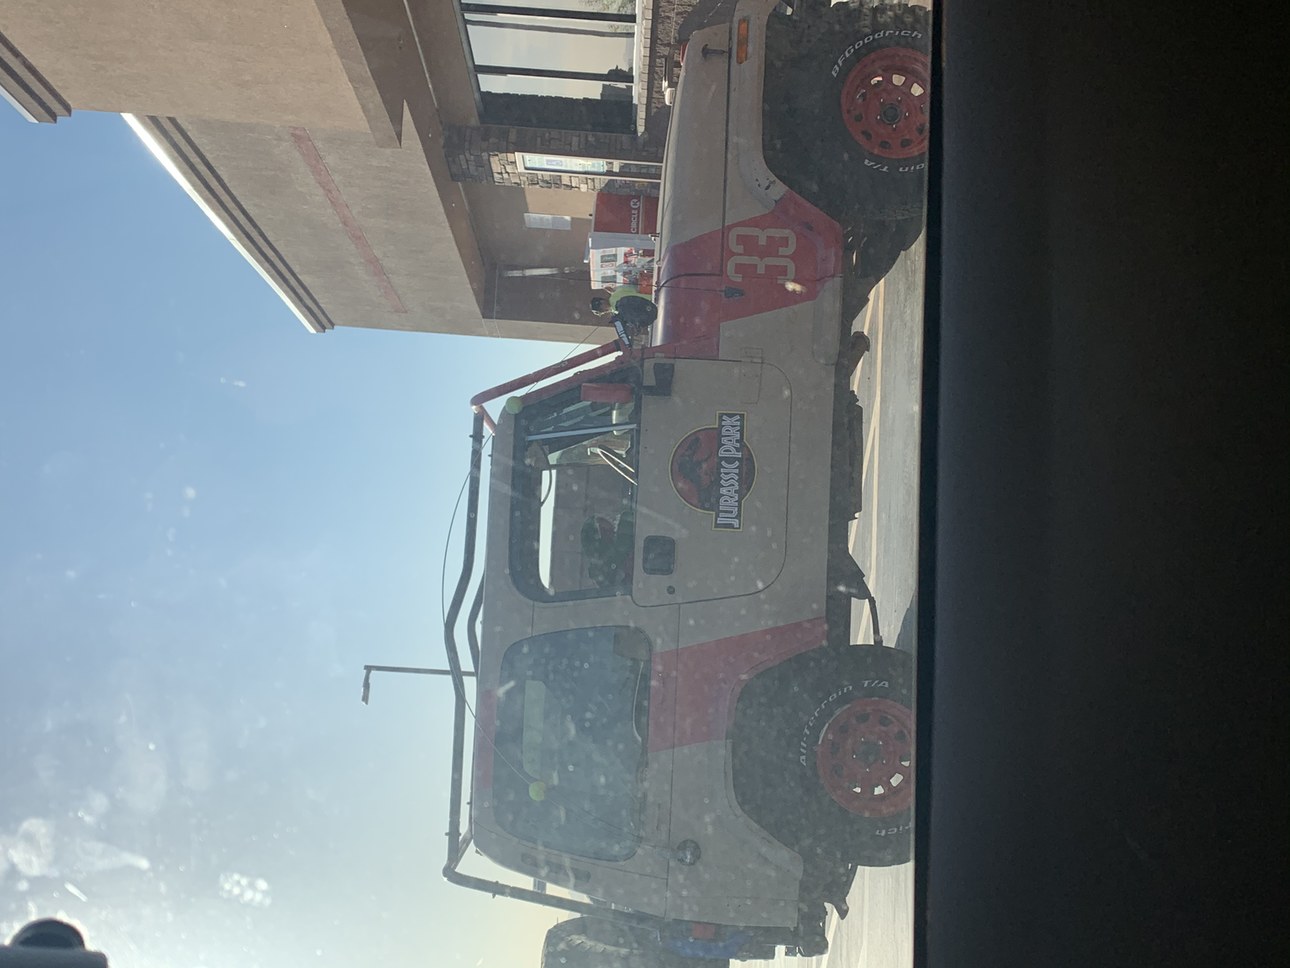 Not a meme, but it’s a Jeep I saw at Circle K